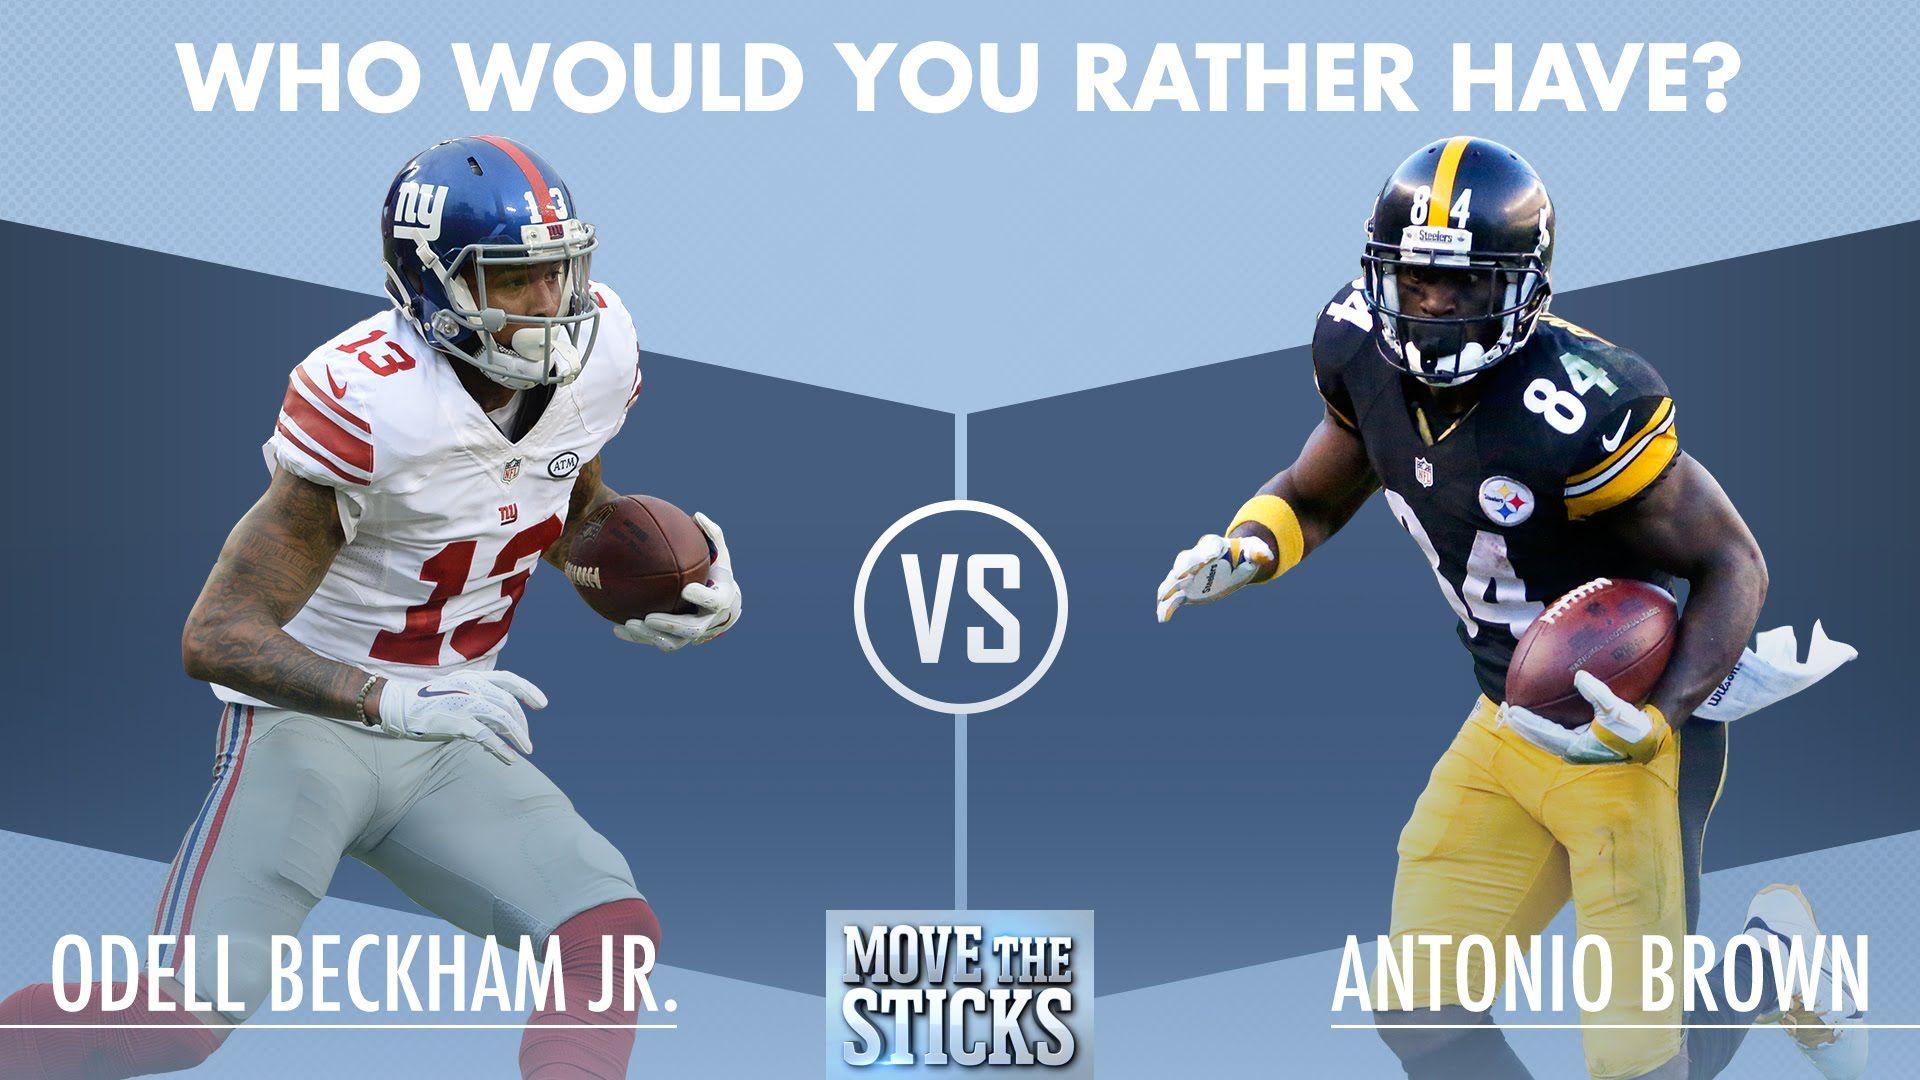 Who Would You Rather Have: Odell Beckham or Antonio Brown?. Move